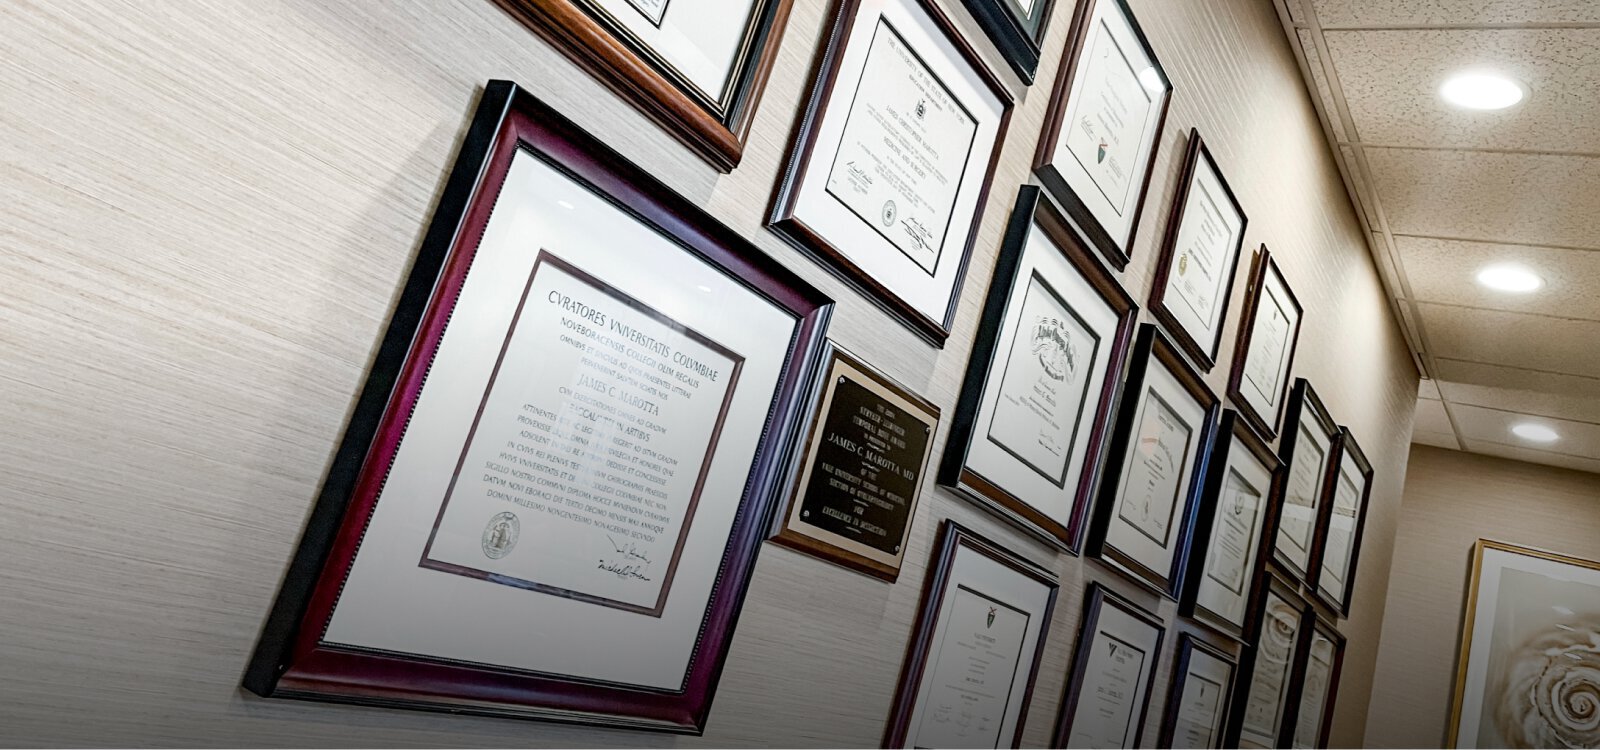 Marotta Plastic Surgery Specialists certifications and awards